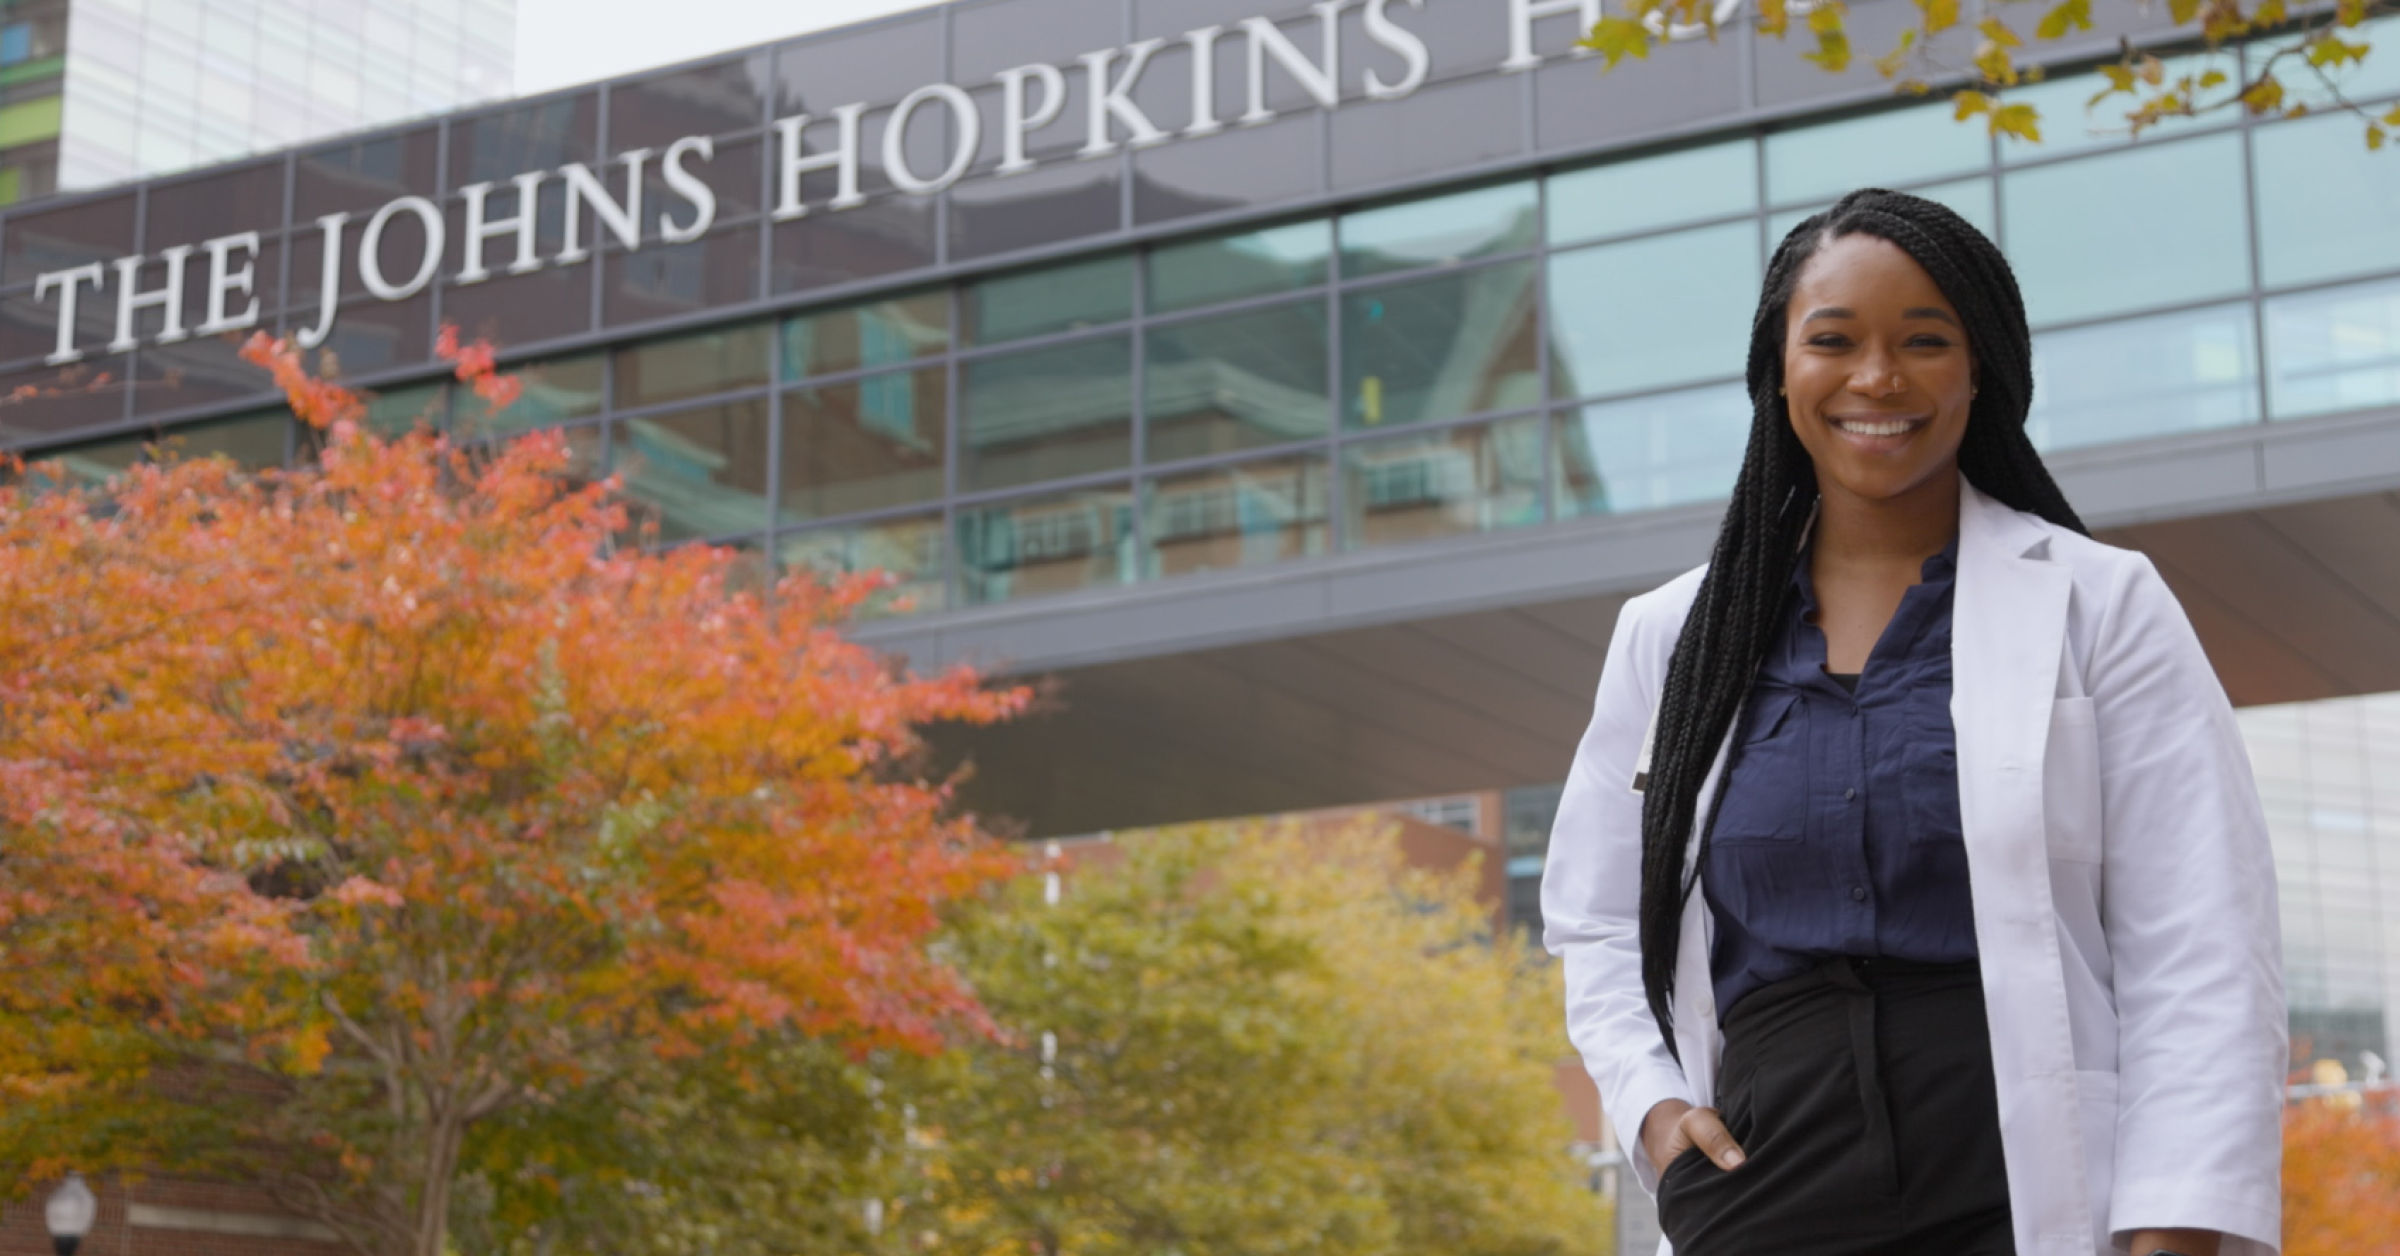 Dr. Osose Oboh, former medical student and current intern, standing in front of Johns Hopkins Hospital.